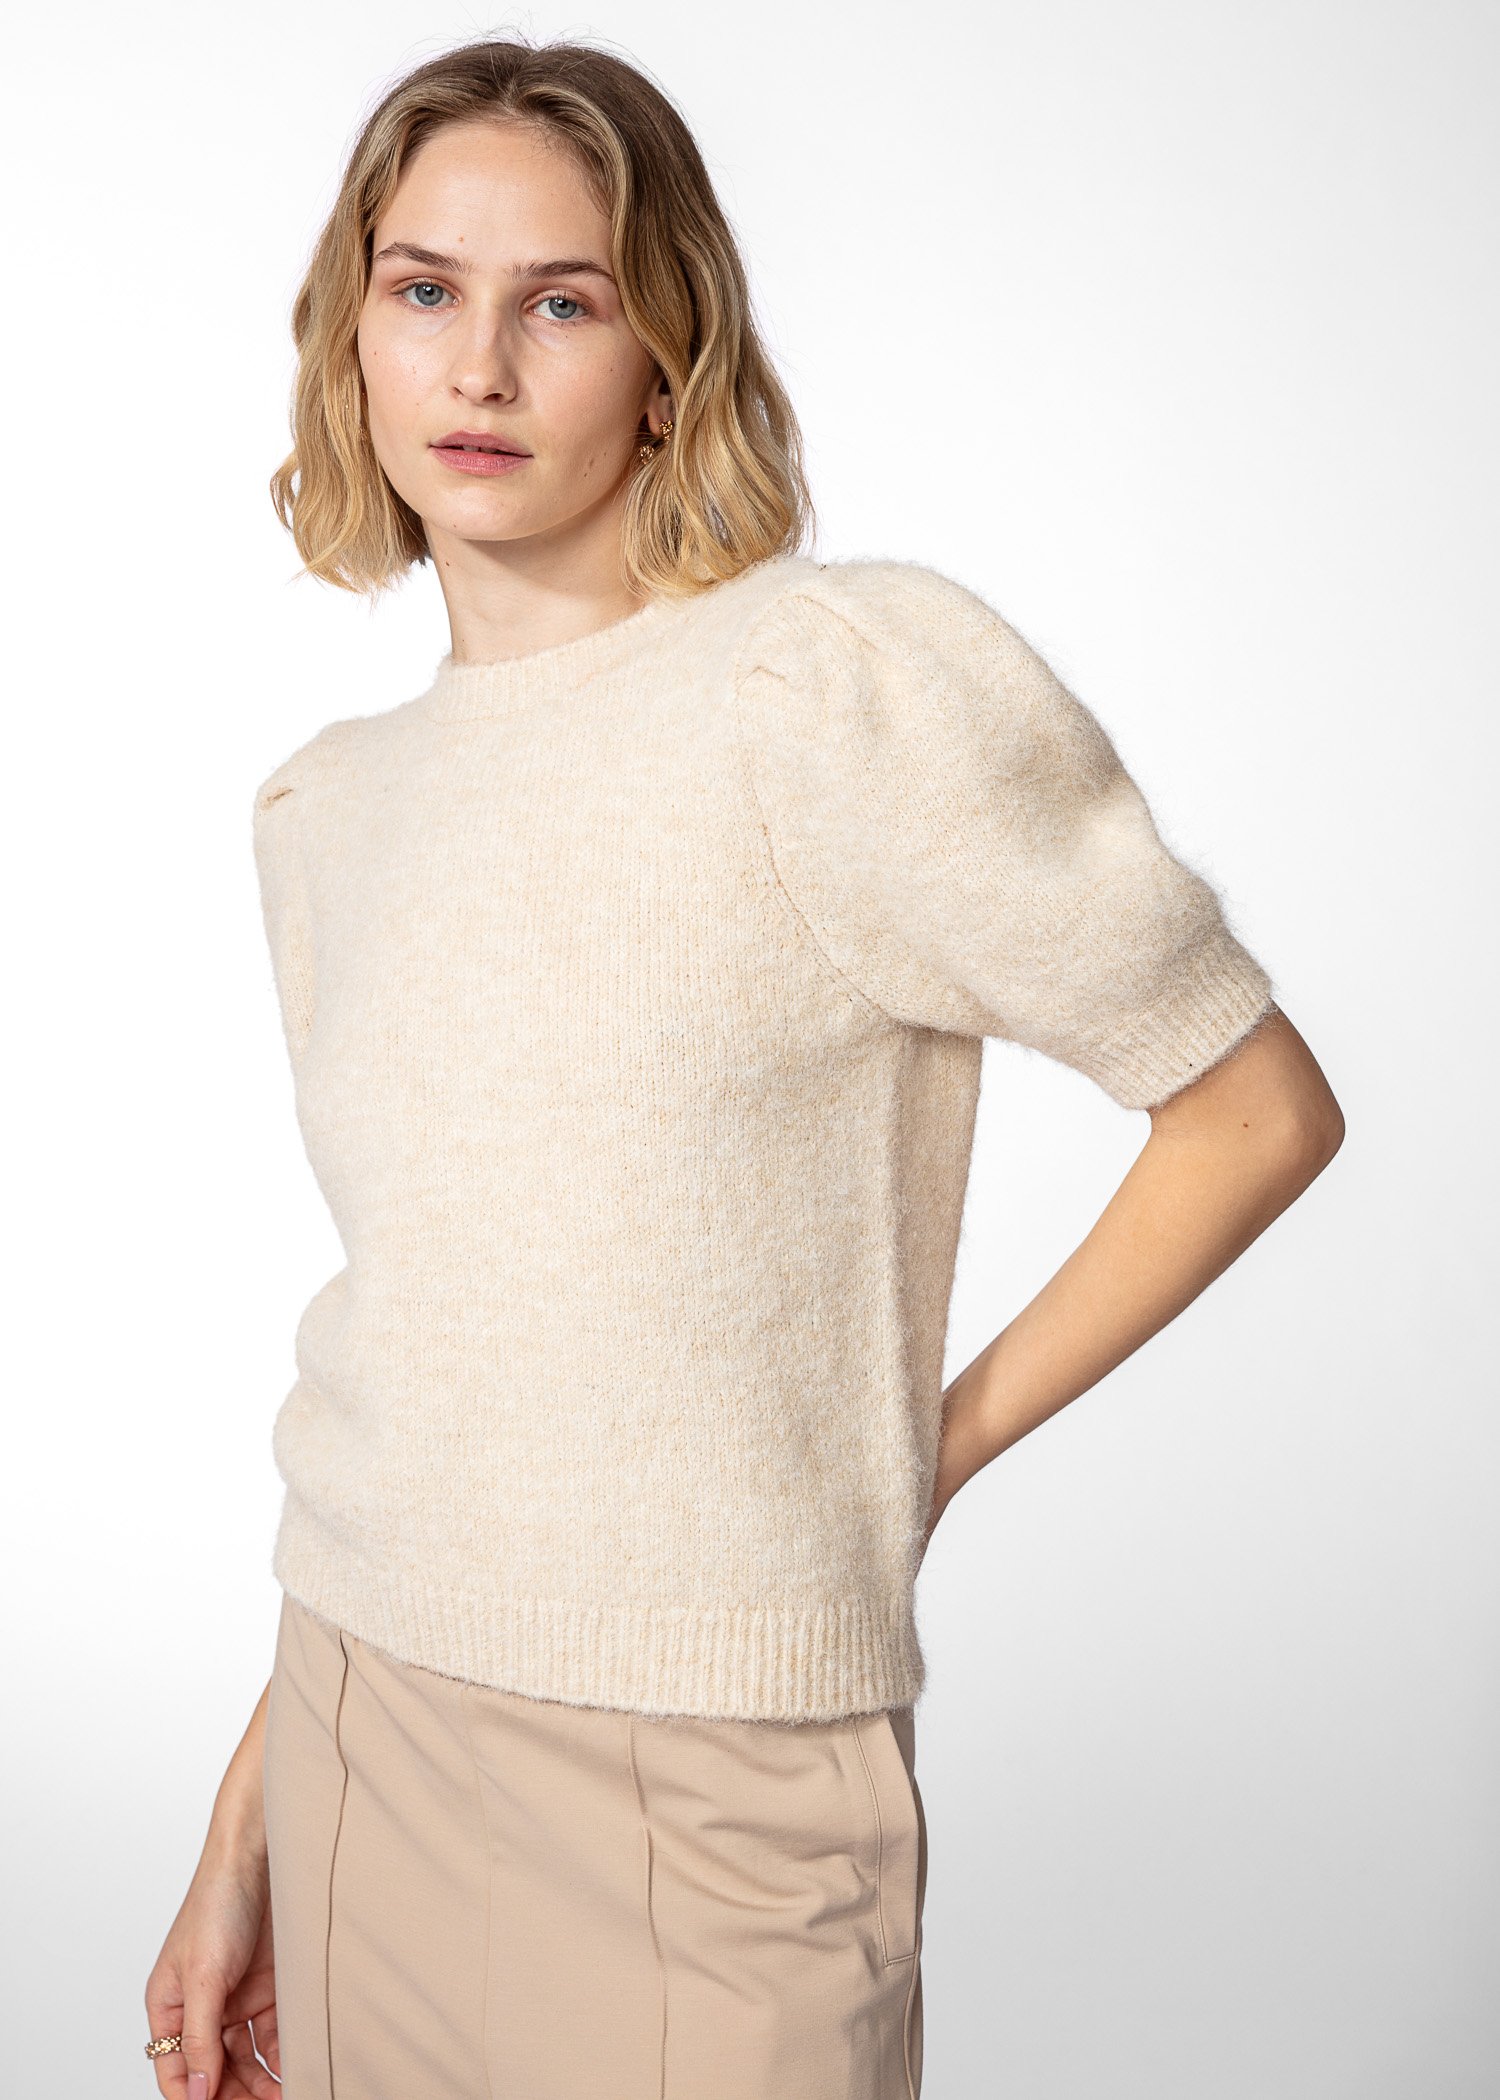 Soft knitted sweater